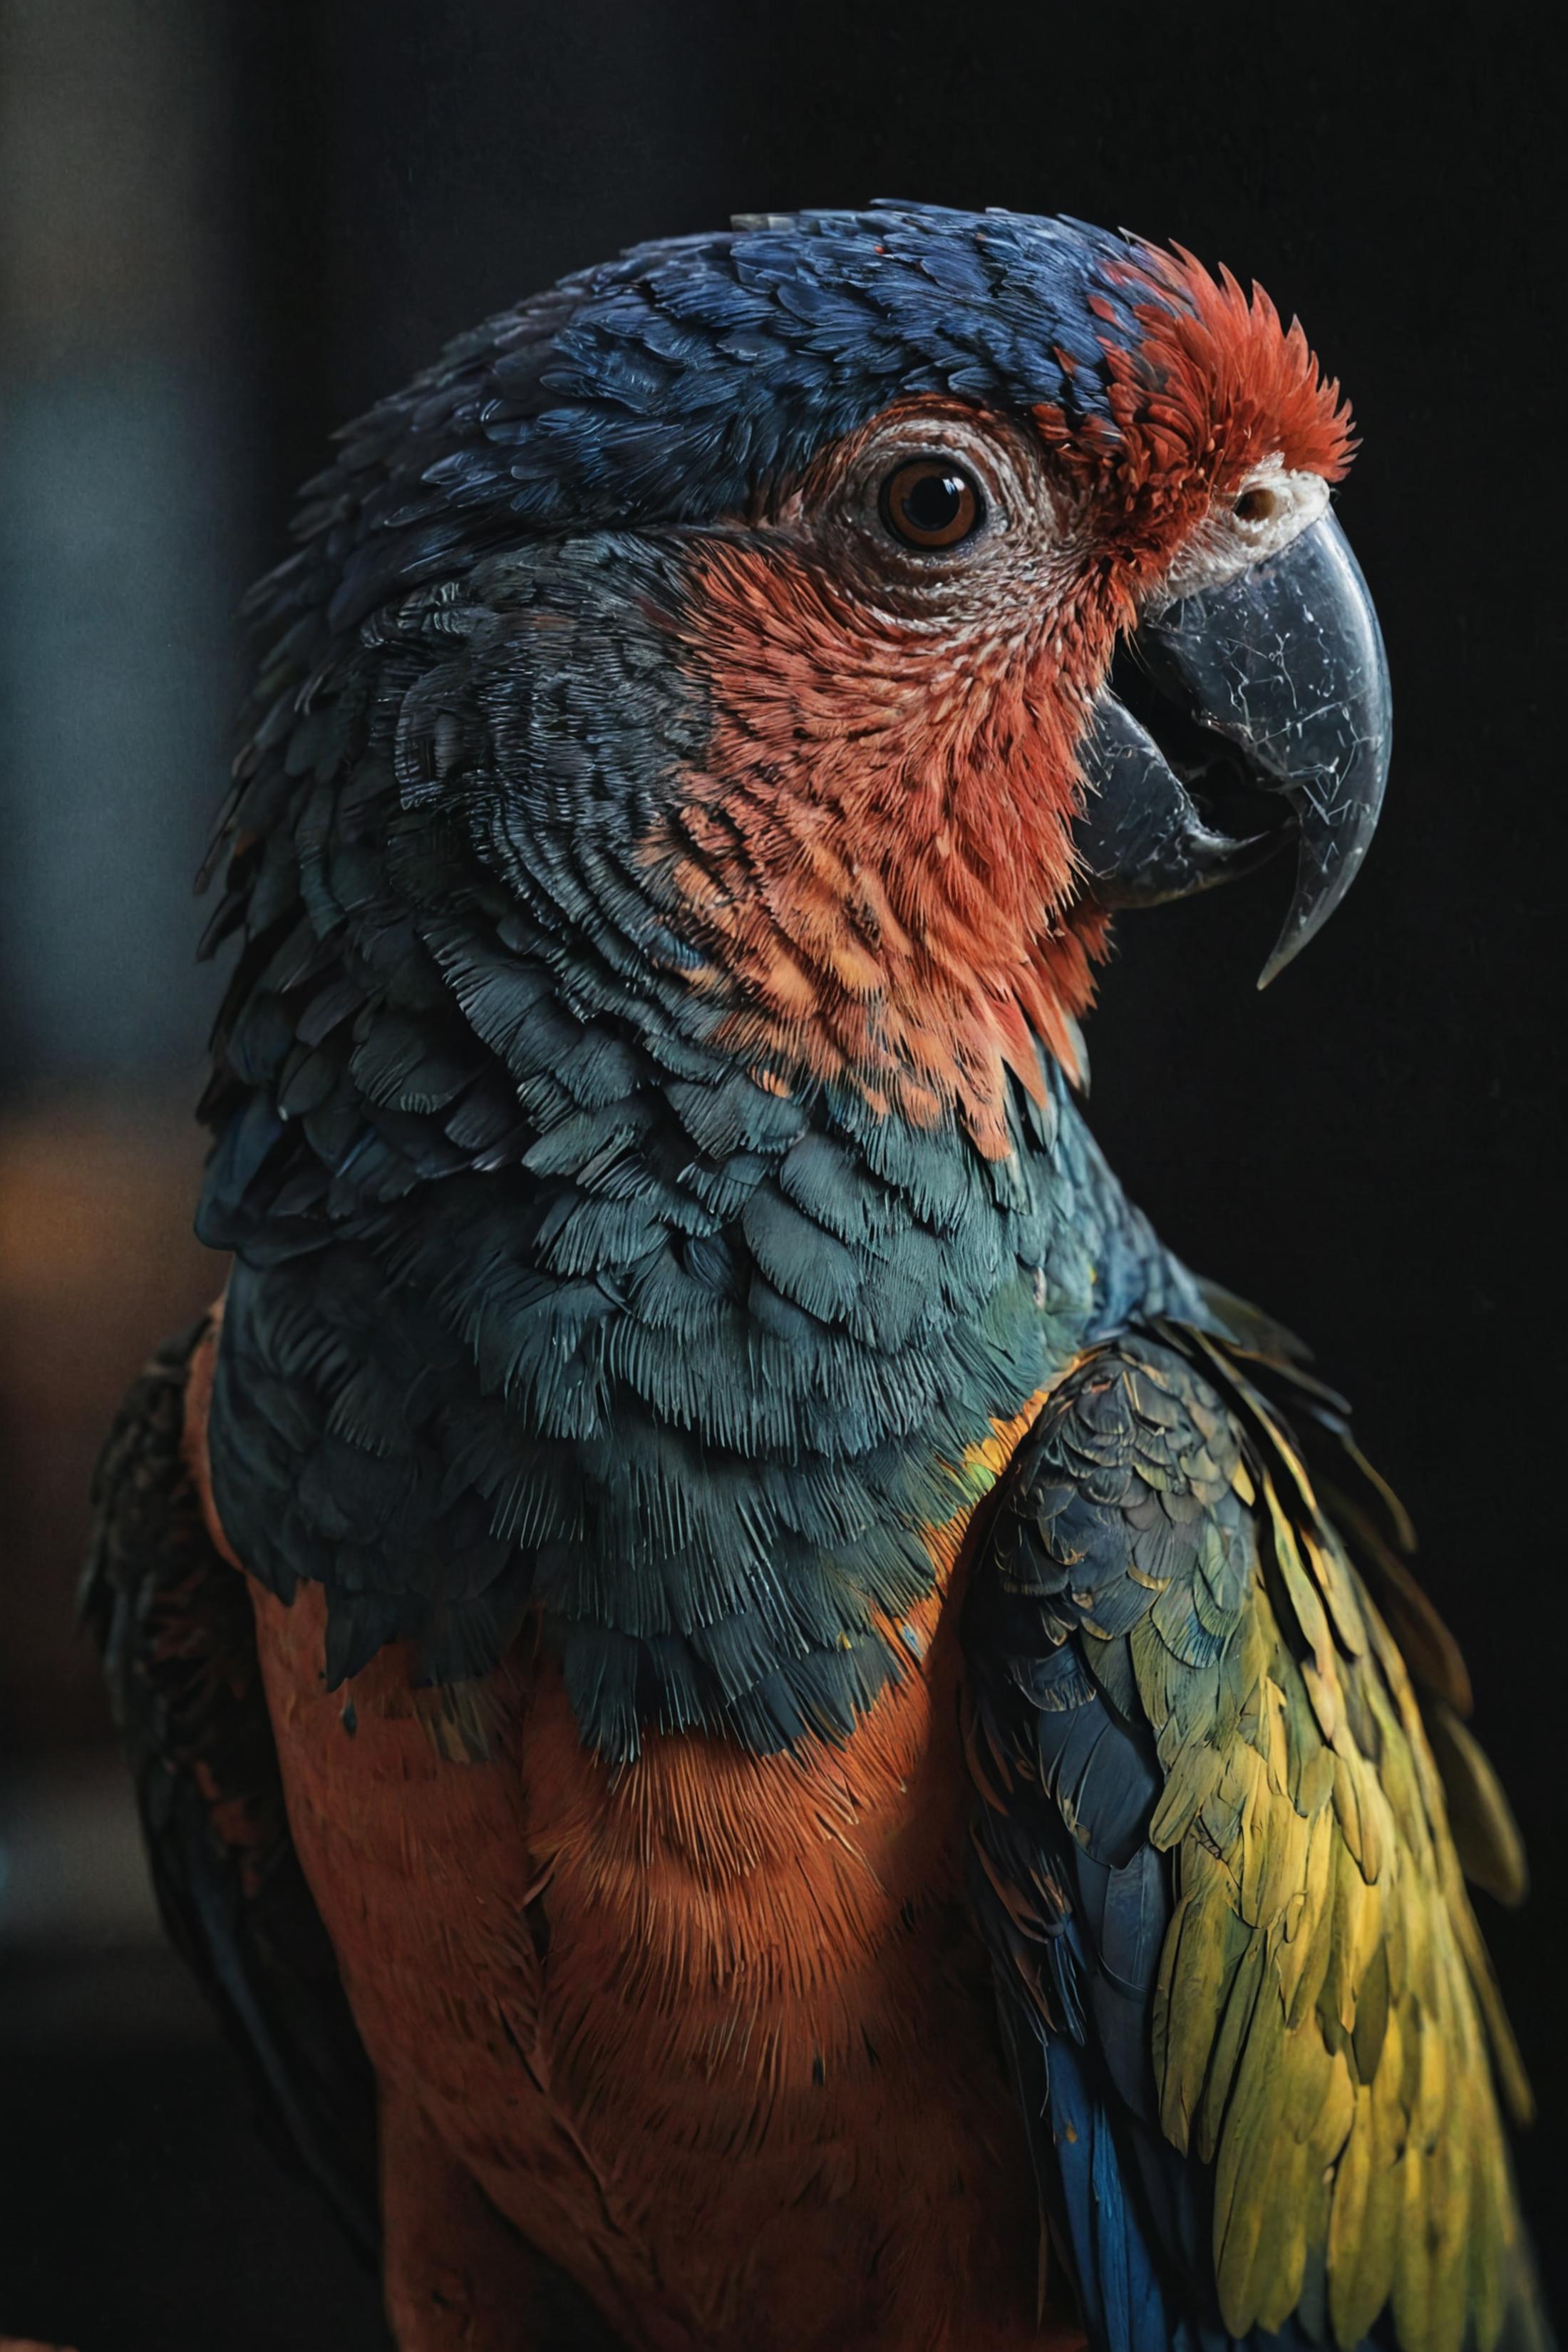 The face of a colorful parrot with a blue beak.